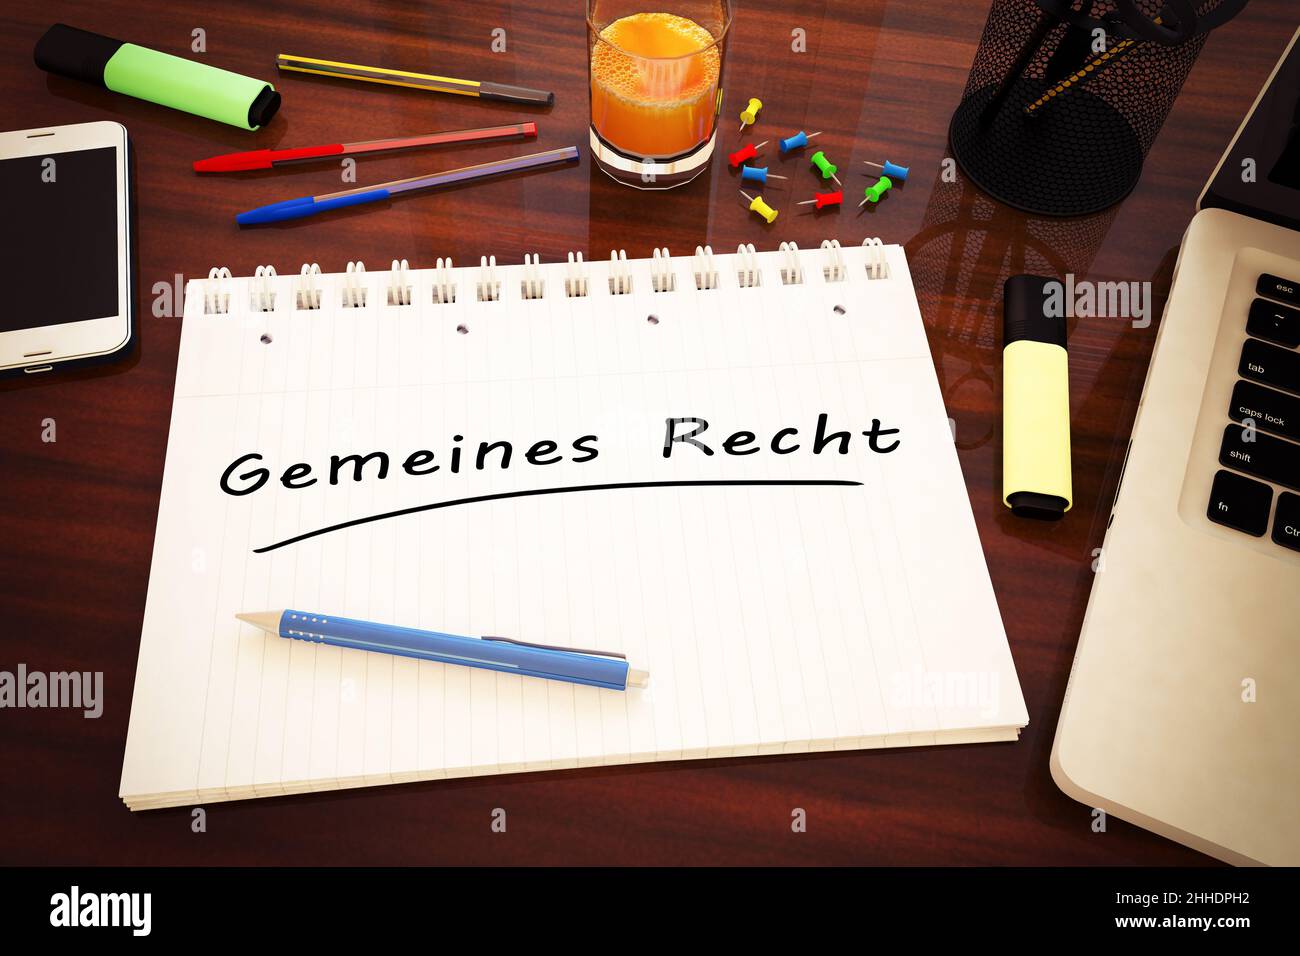 Gemeines Recht - german word for common right - handwritten text in a notebook on a desk - 3d render illustration. Stock Photo